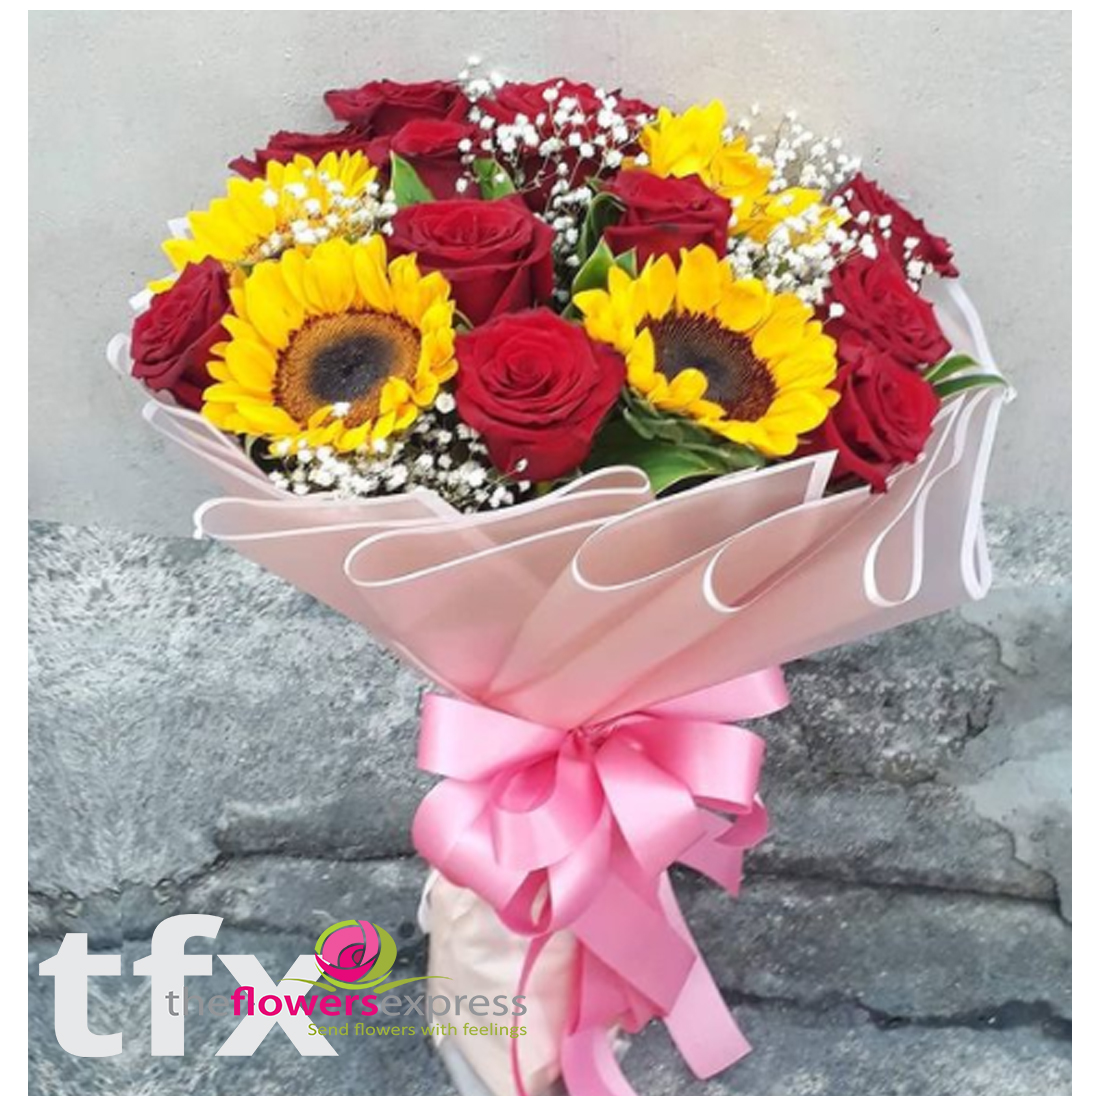 The Flowers Express Philippines, Send flowers with feelings!, Ara(Dozen ...